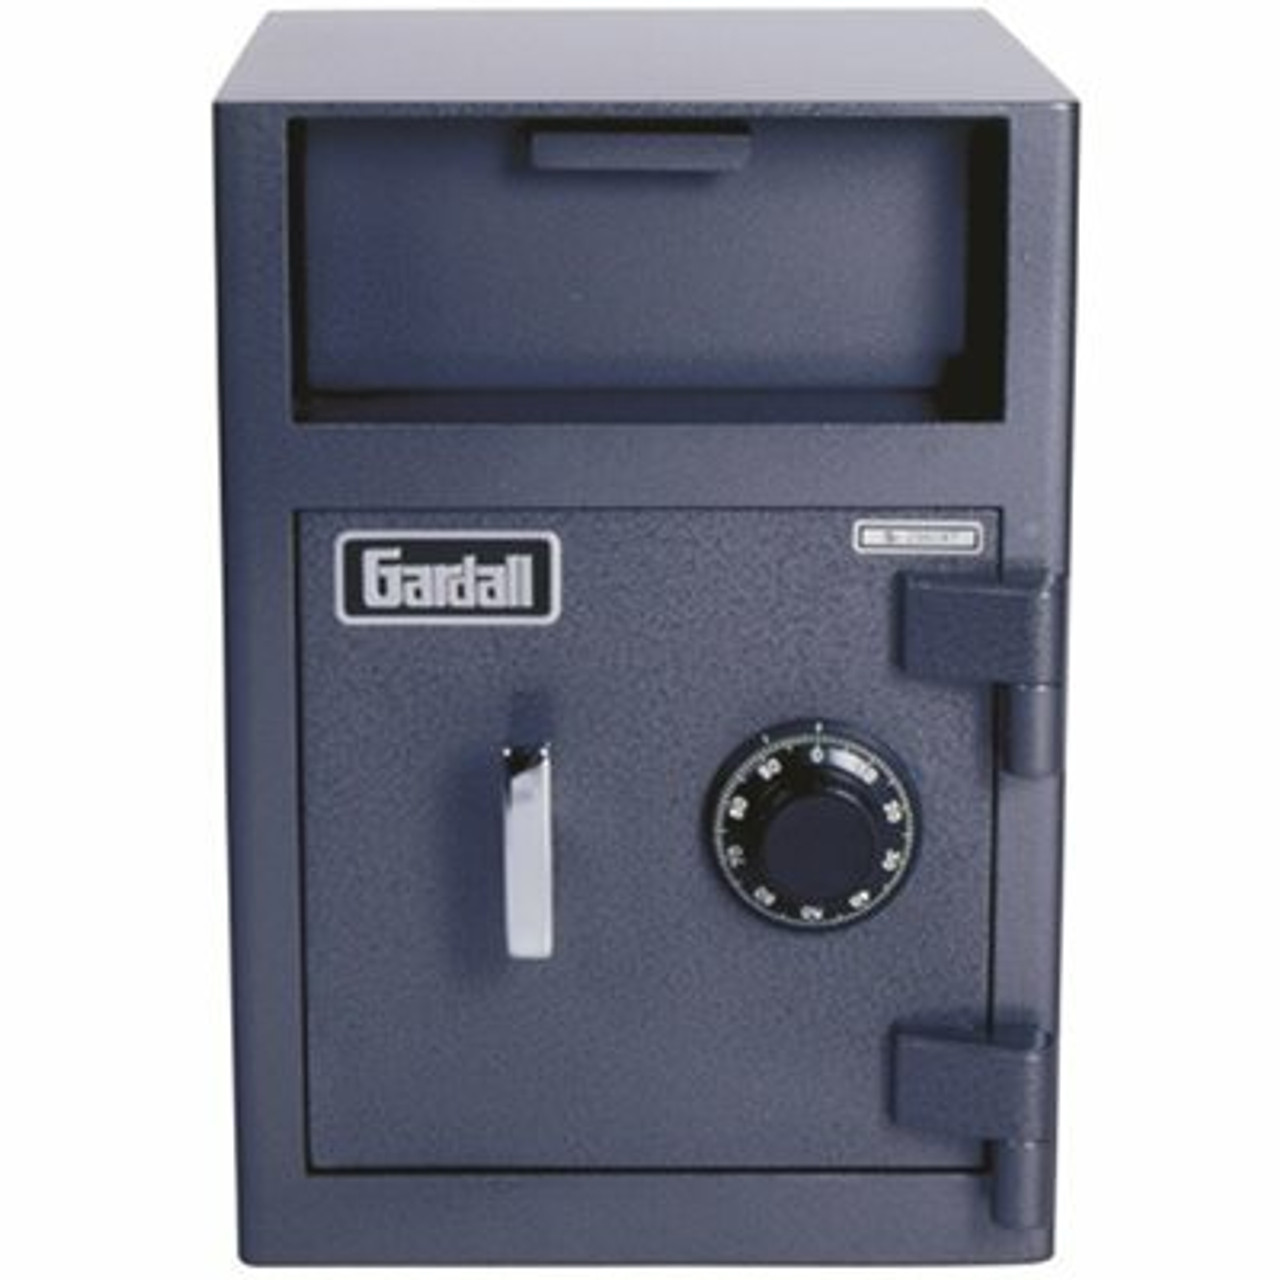 Gardall Gardall Front & Top Loading Depository Safe S & G Combo Lock